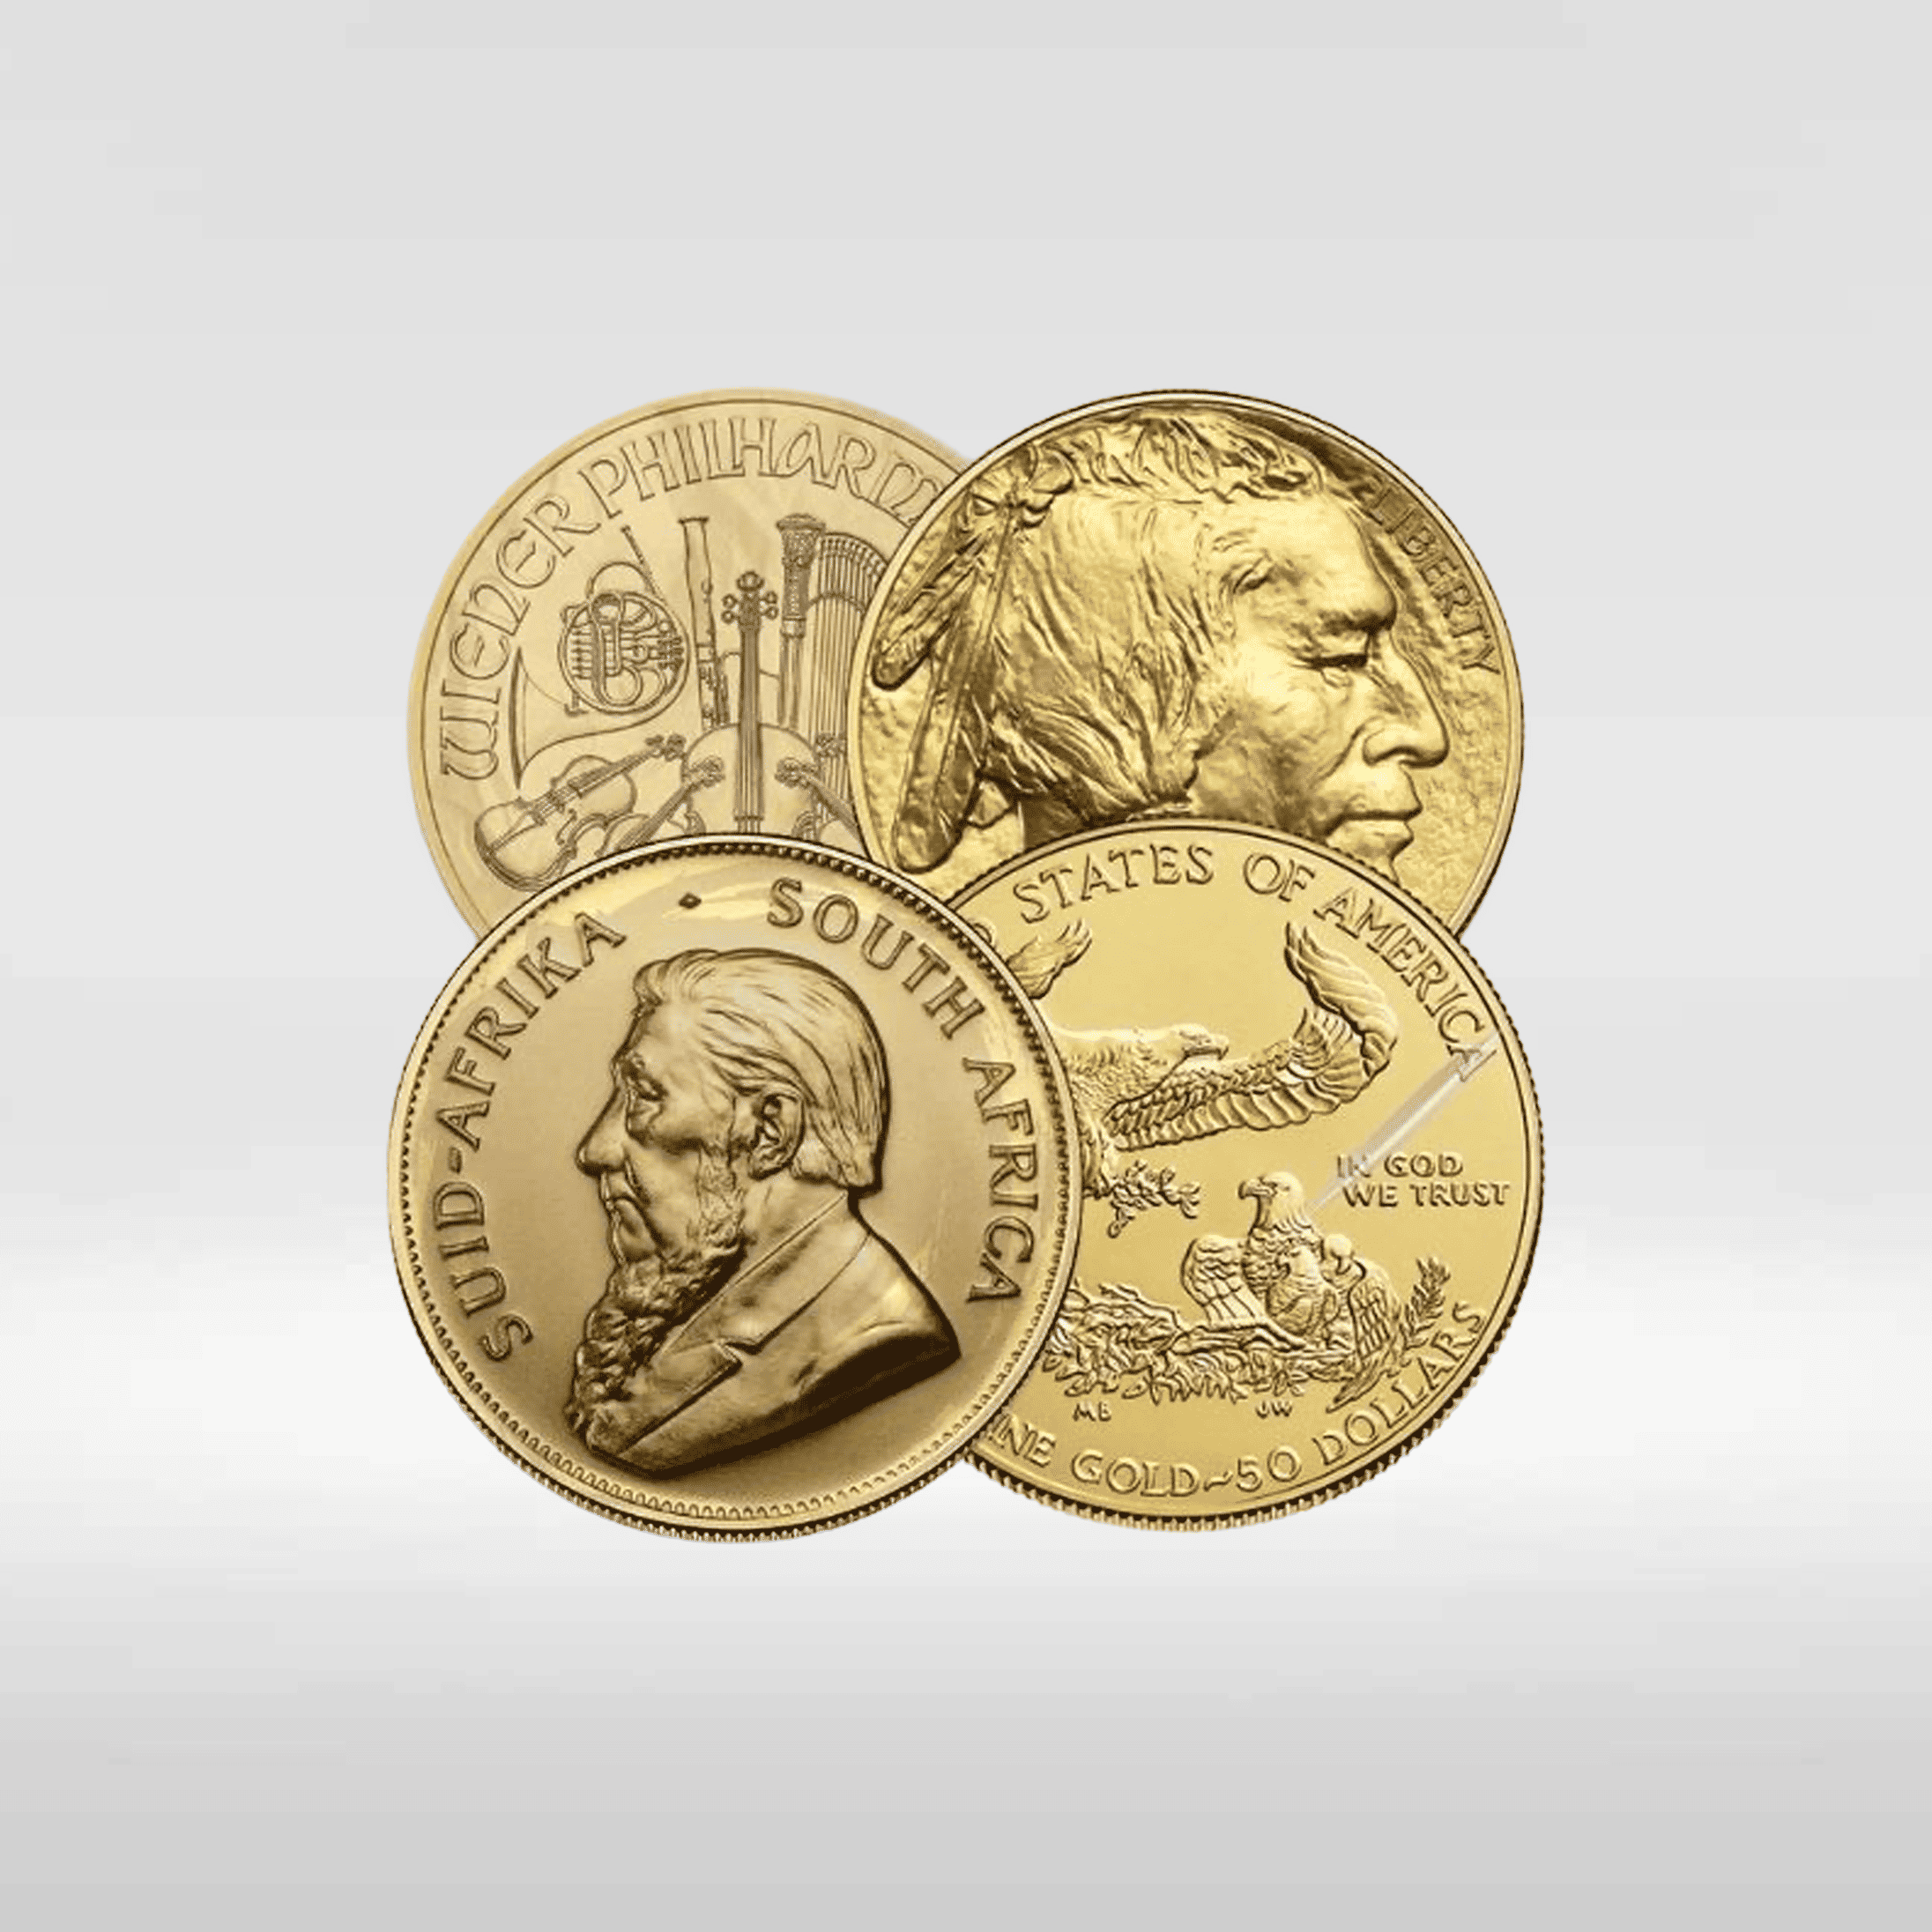 Sell Gold Coins to Atkinsons Bullion